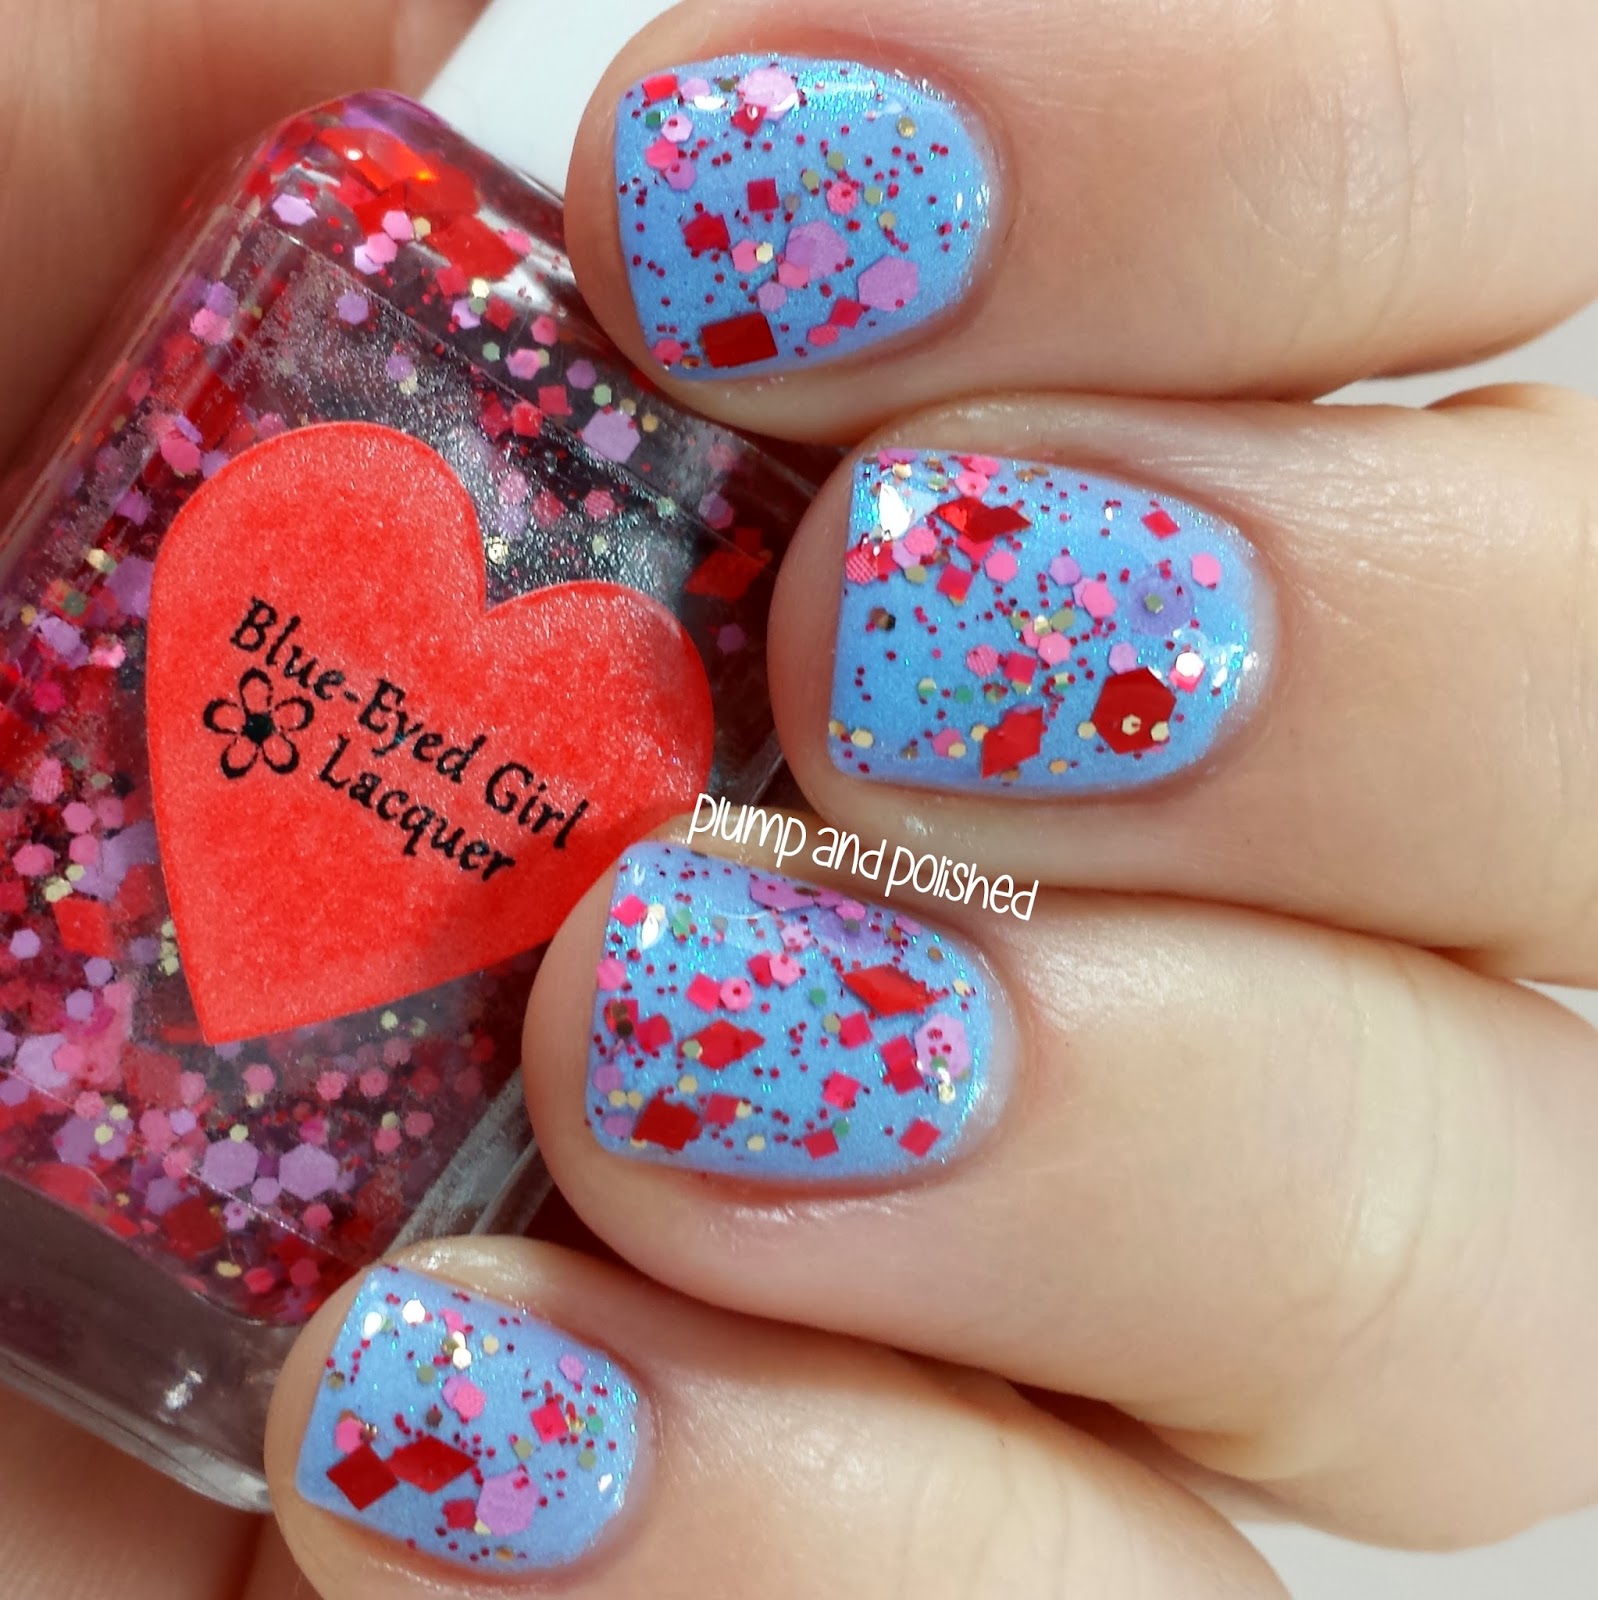 Plump and Polished: Blue-Eyed Girl Lacquer - My Indecisive Valentine